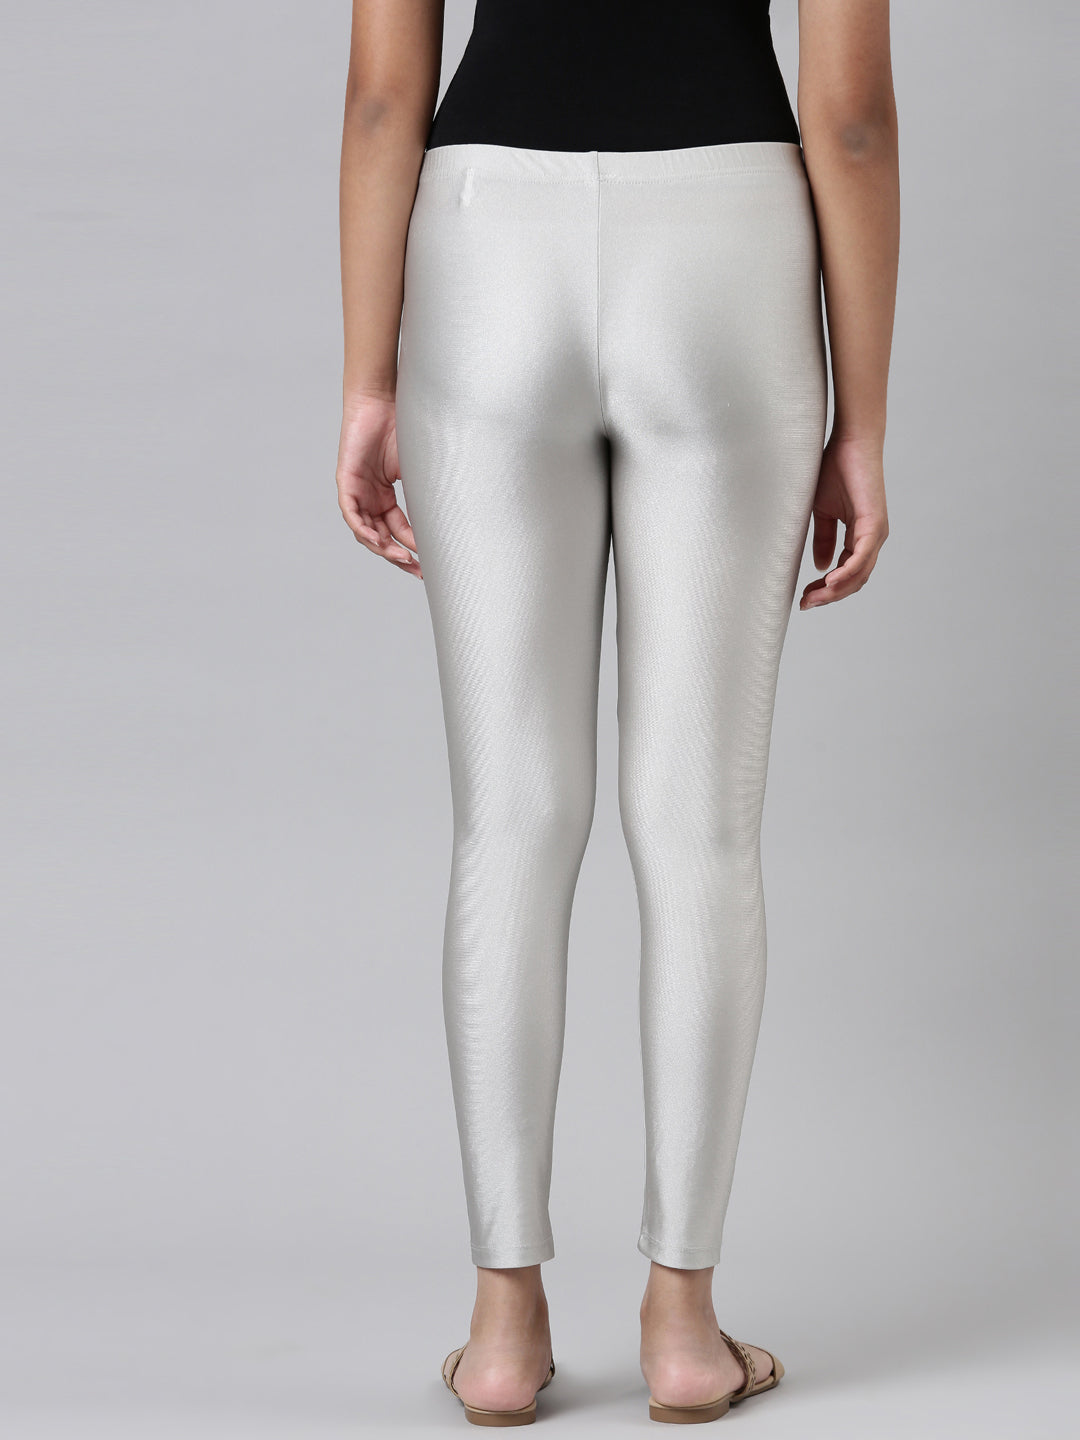 Buy Silver Leggings for Girls by Go Colors Online